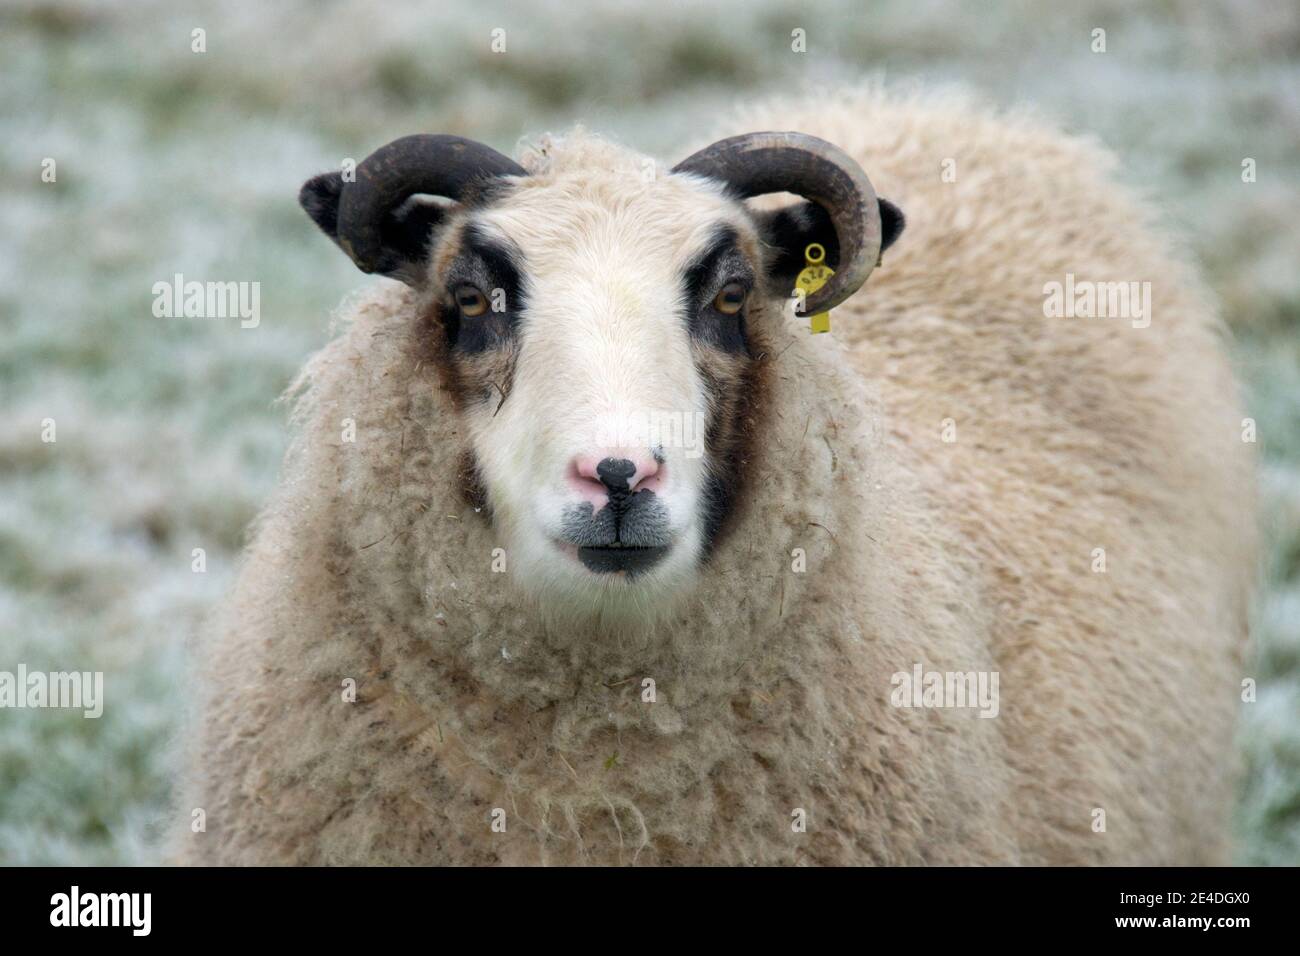 Head and horns of  a pet Shetland wether sheep with black eye 'patches' and white face, Berkshire, July Stock Photo